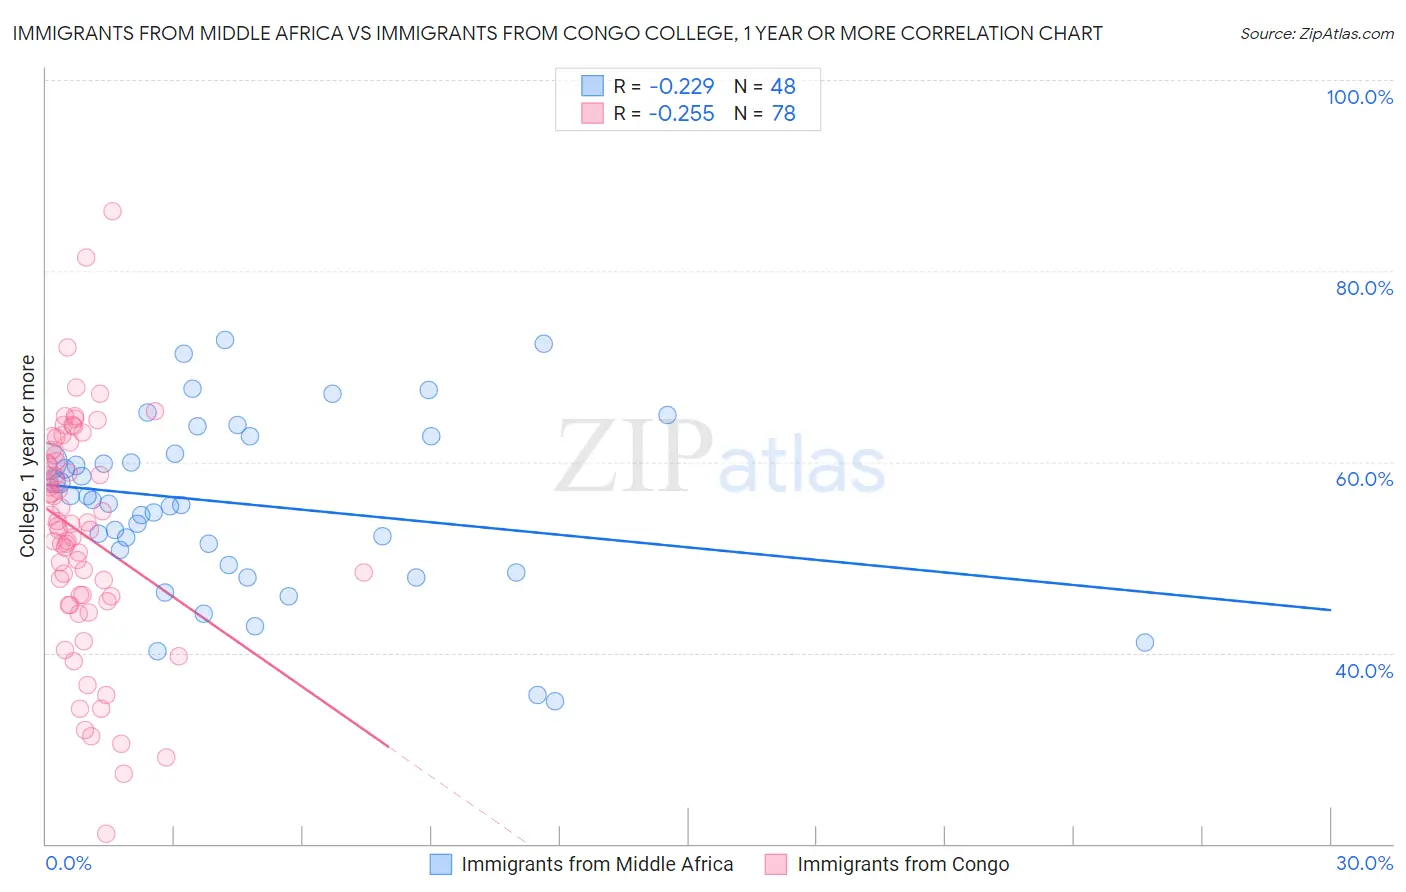 Immigrants from Middle Africa vs Immigrants from Congo College, 1 year or more